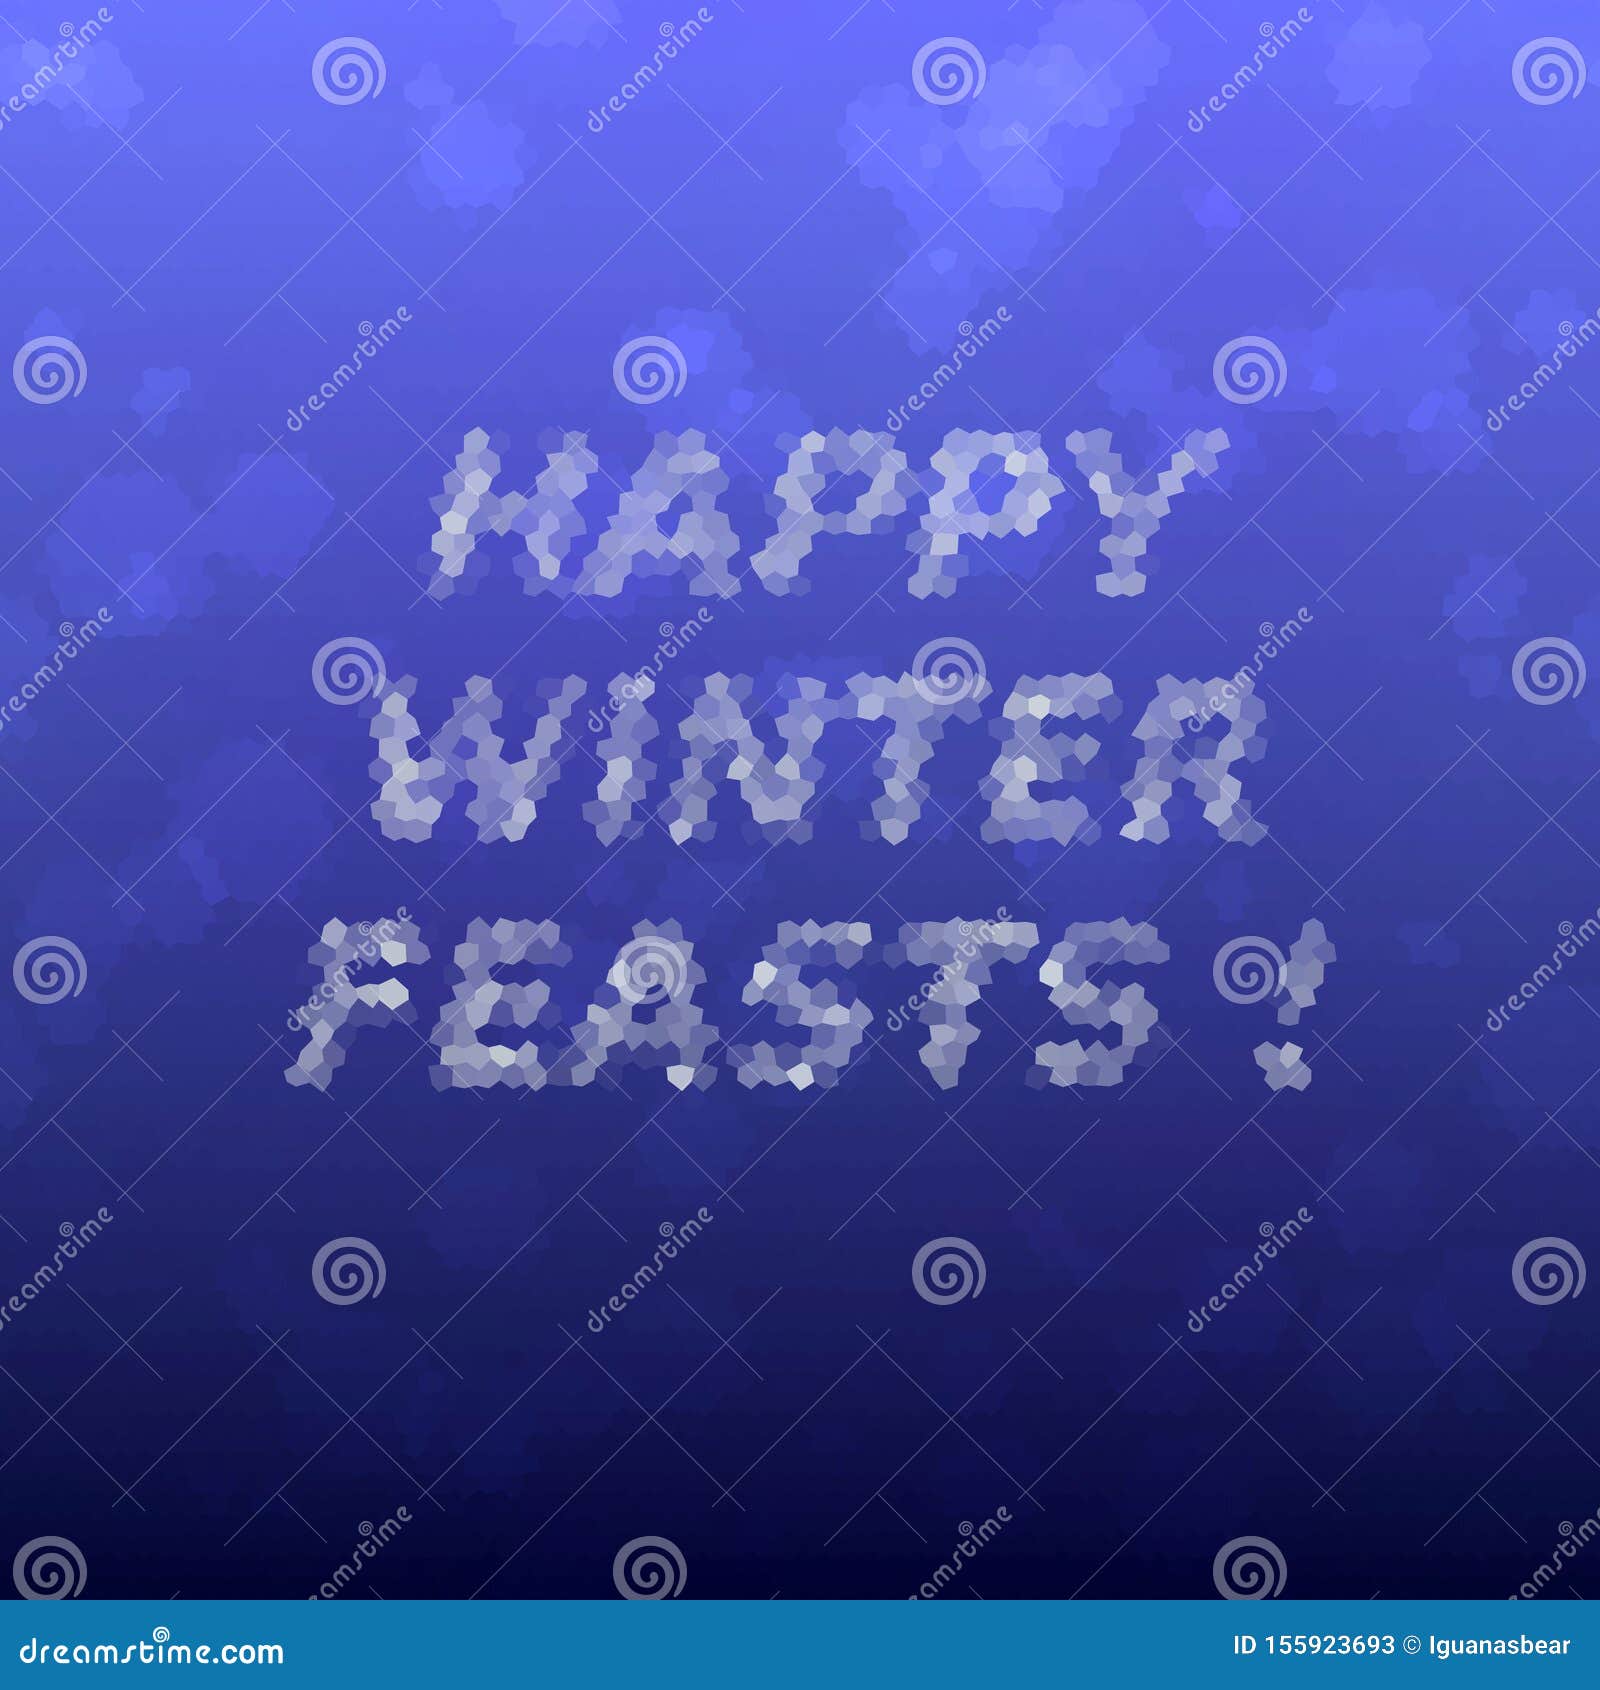 blue white low poly ice crystals sparkling inscription happy winter feasts